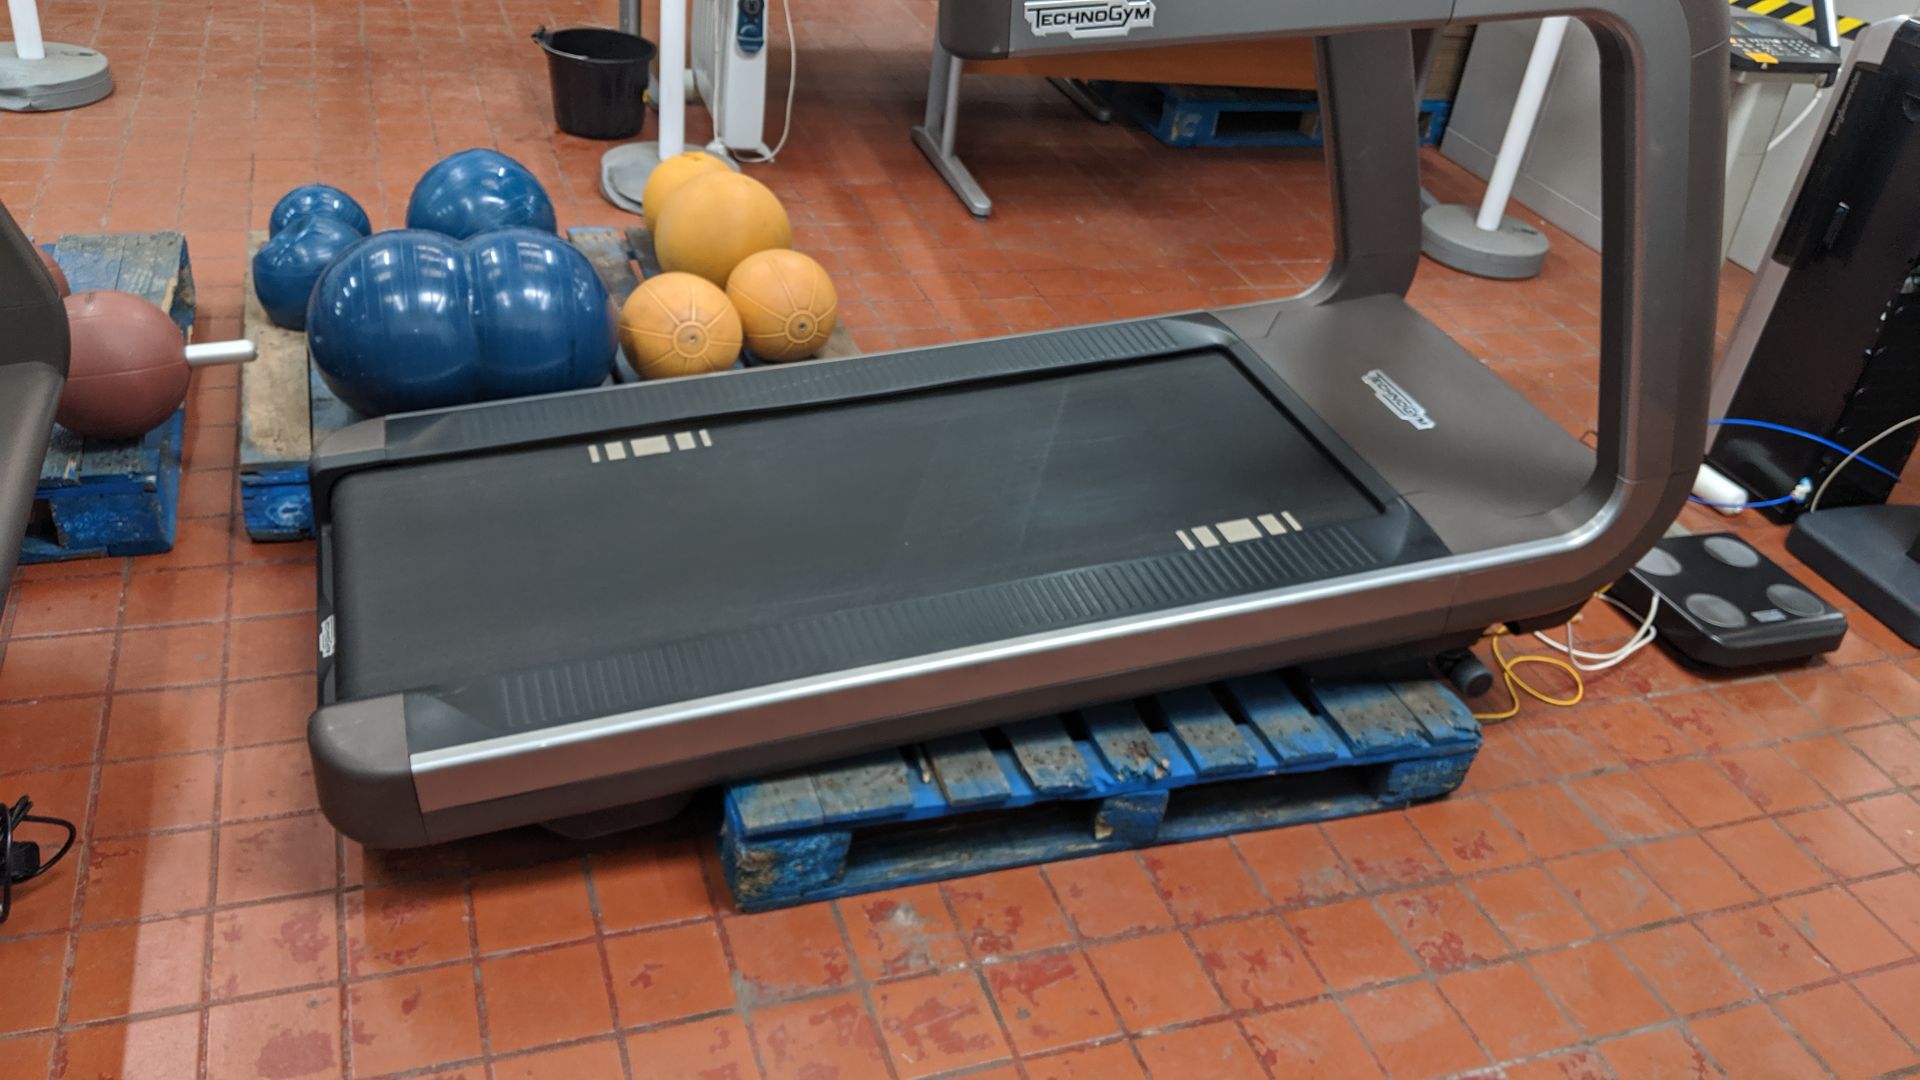 Technogym Artis treadmill Purchased new in 2016 - refurbished/recommissioned by Technogym - please - Image 7 of 16